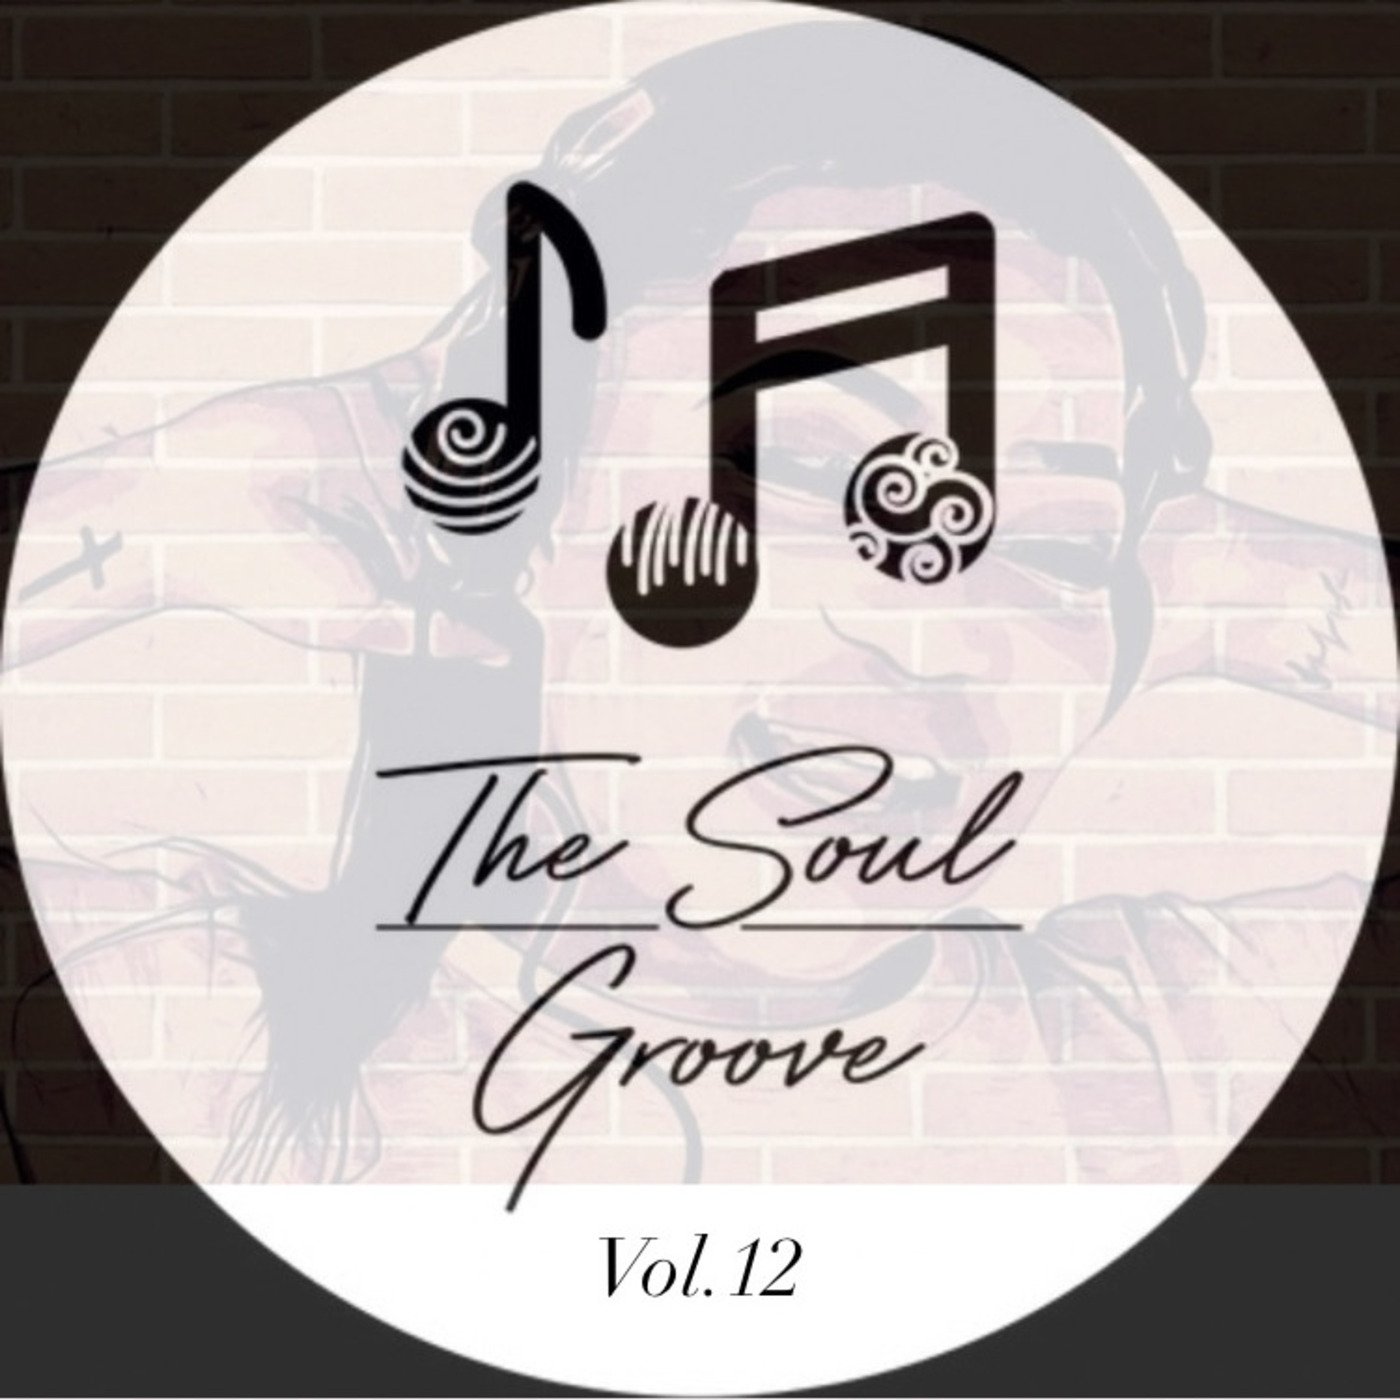 The Soul Groove Vol 12 - Mixed by Mootjies